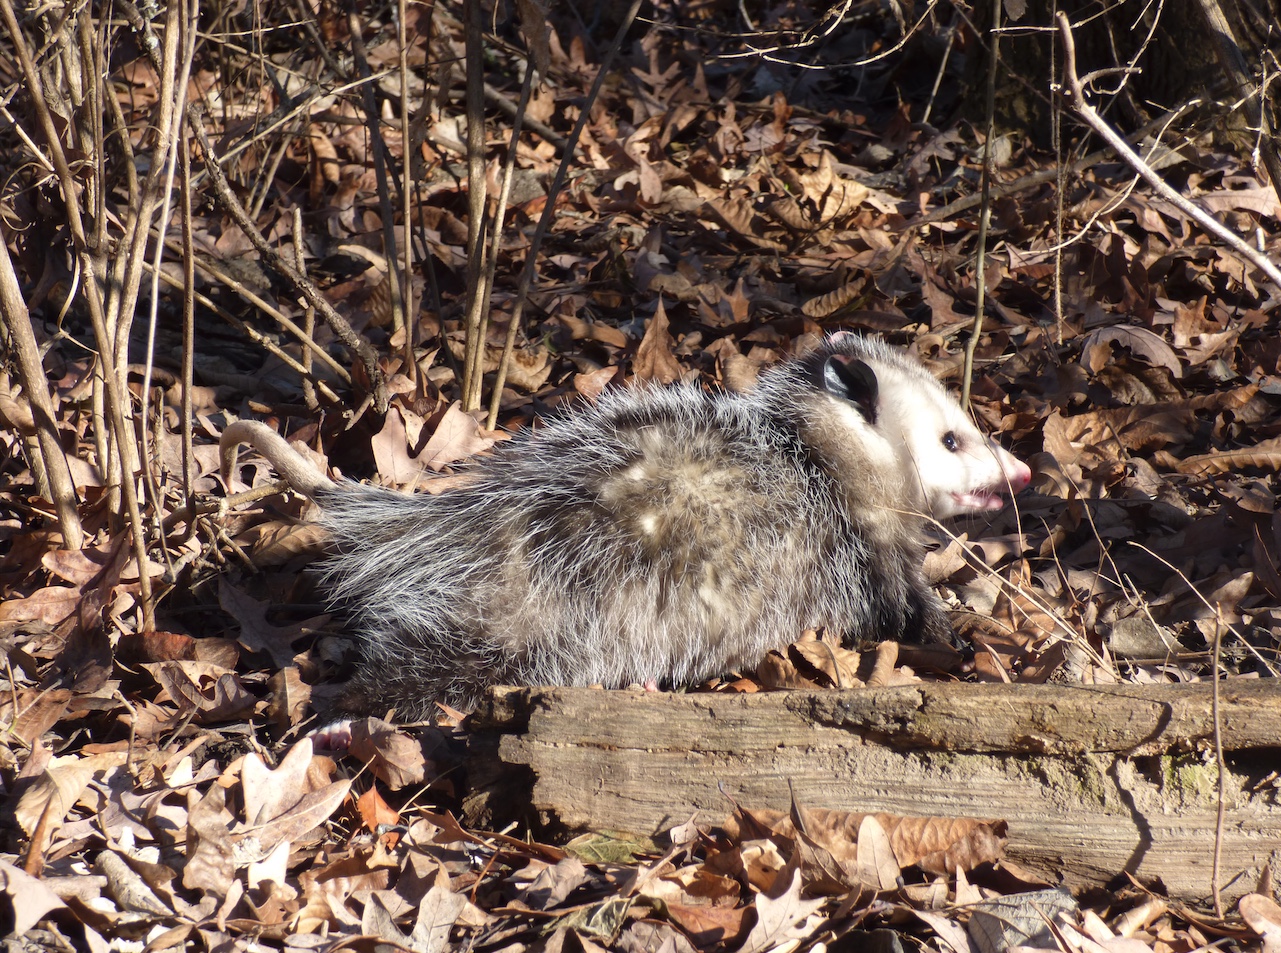 Opossum sitting next to a log in the woods.